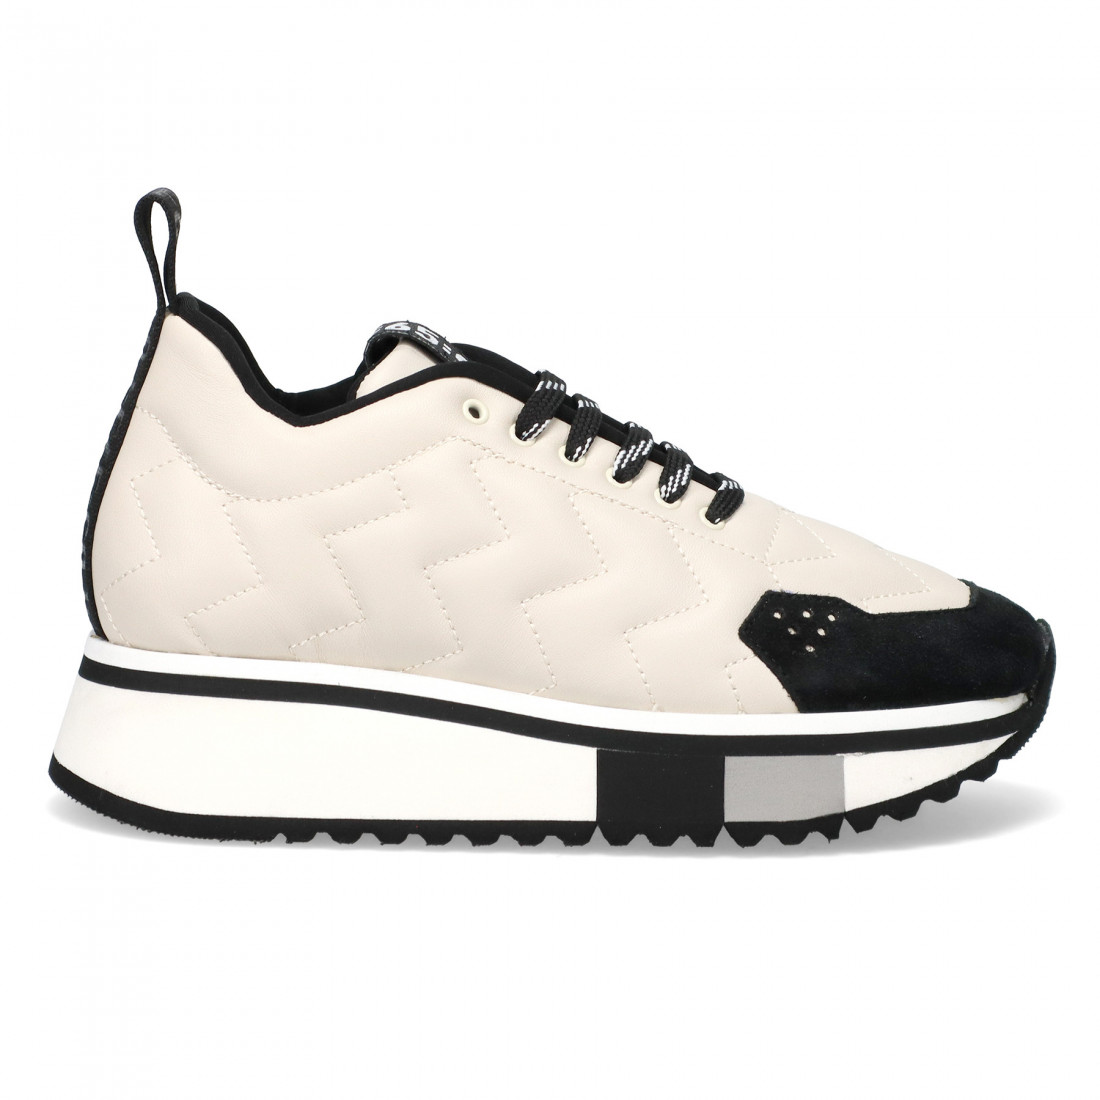 Fabi F65 beige and black women's sneaker in quilted leather